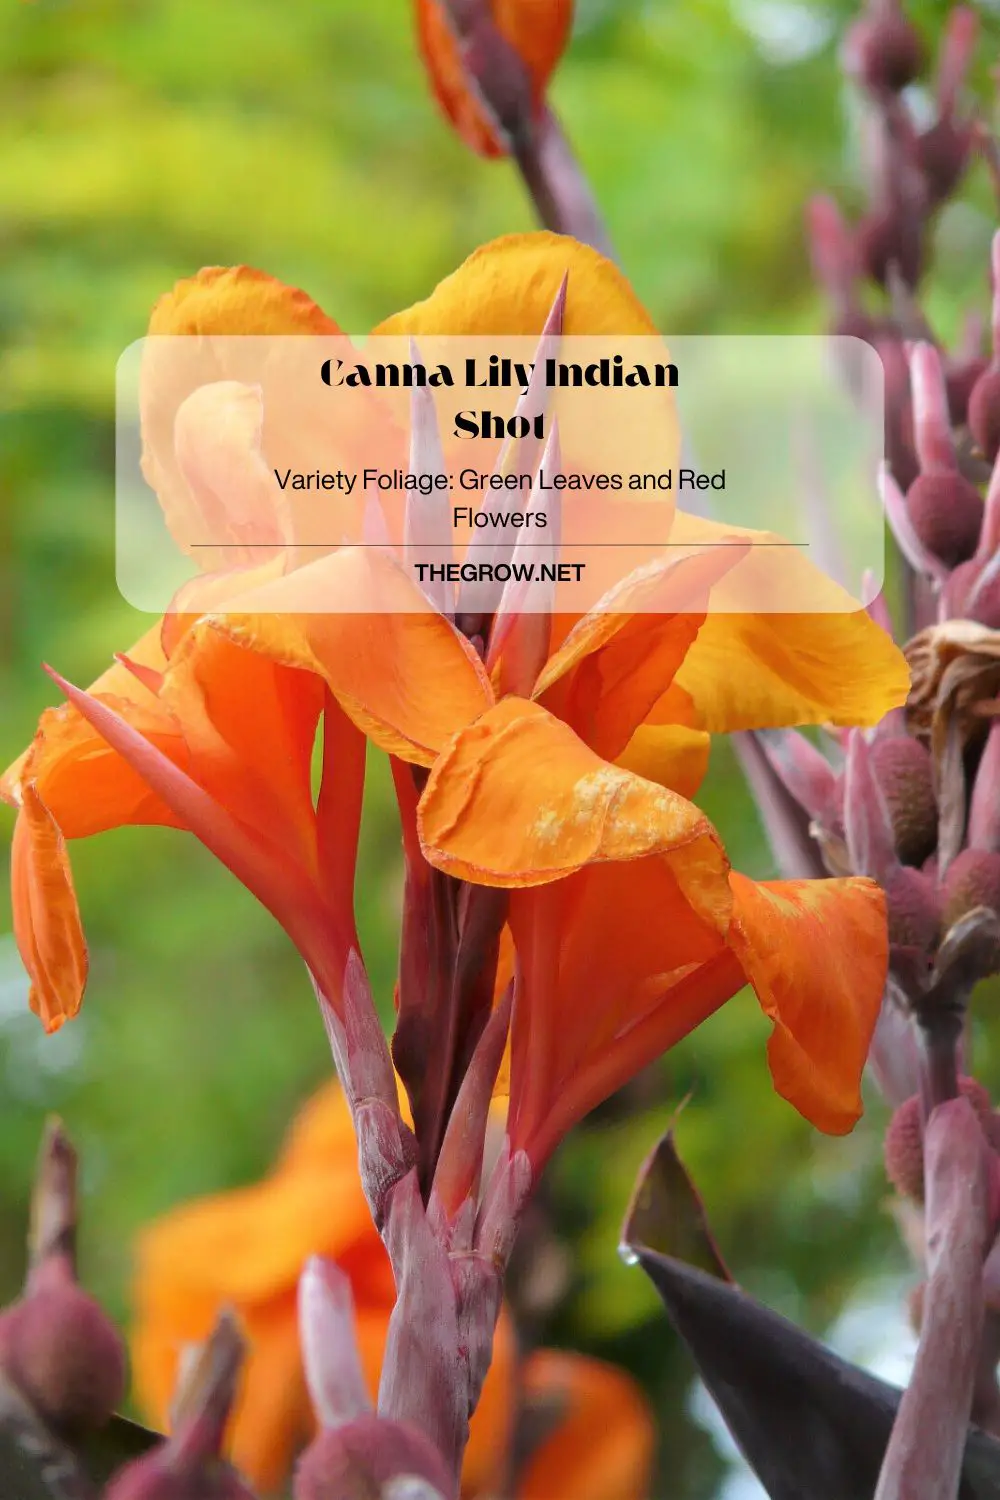 Canna Lily Indian Shot